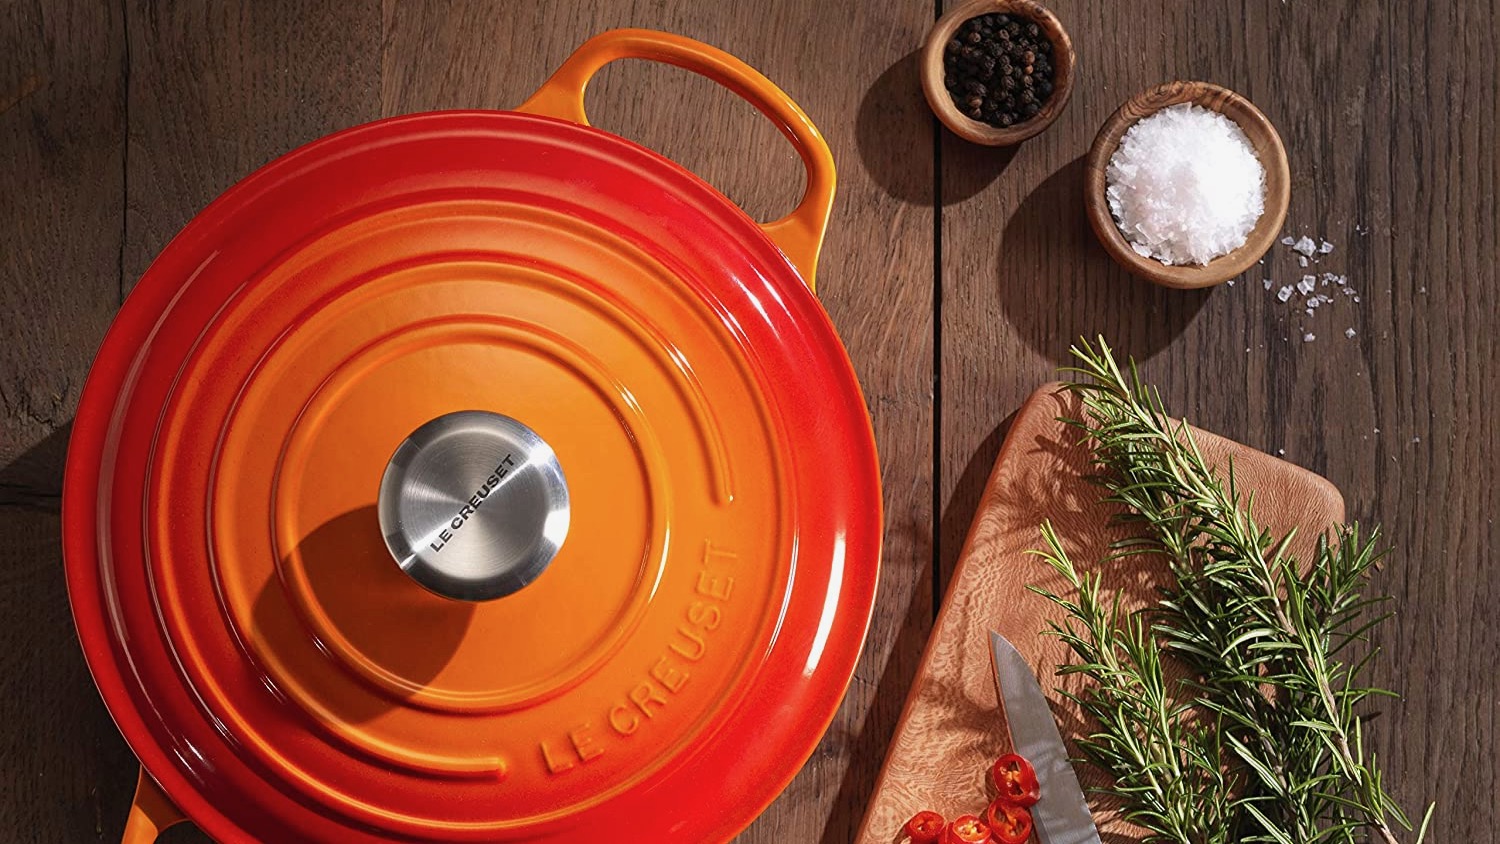 Le Creuset Cookware Review: Is It Worth The Investment?